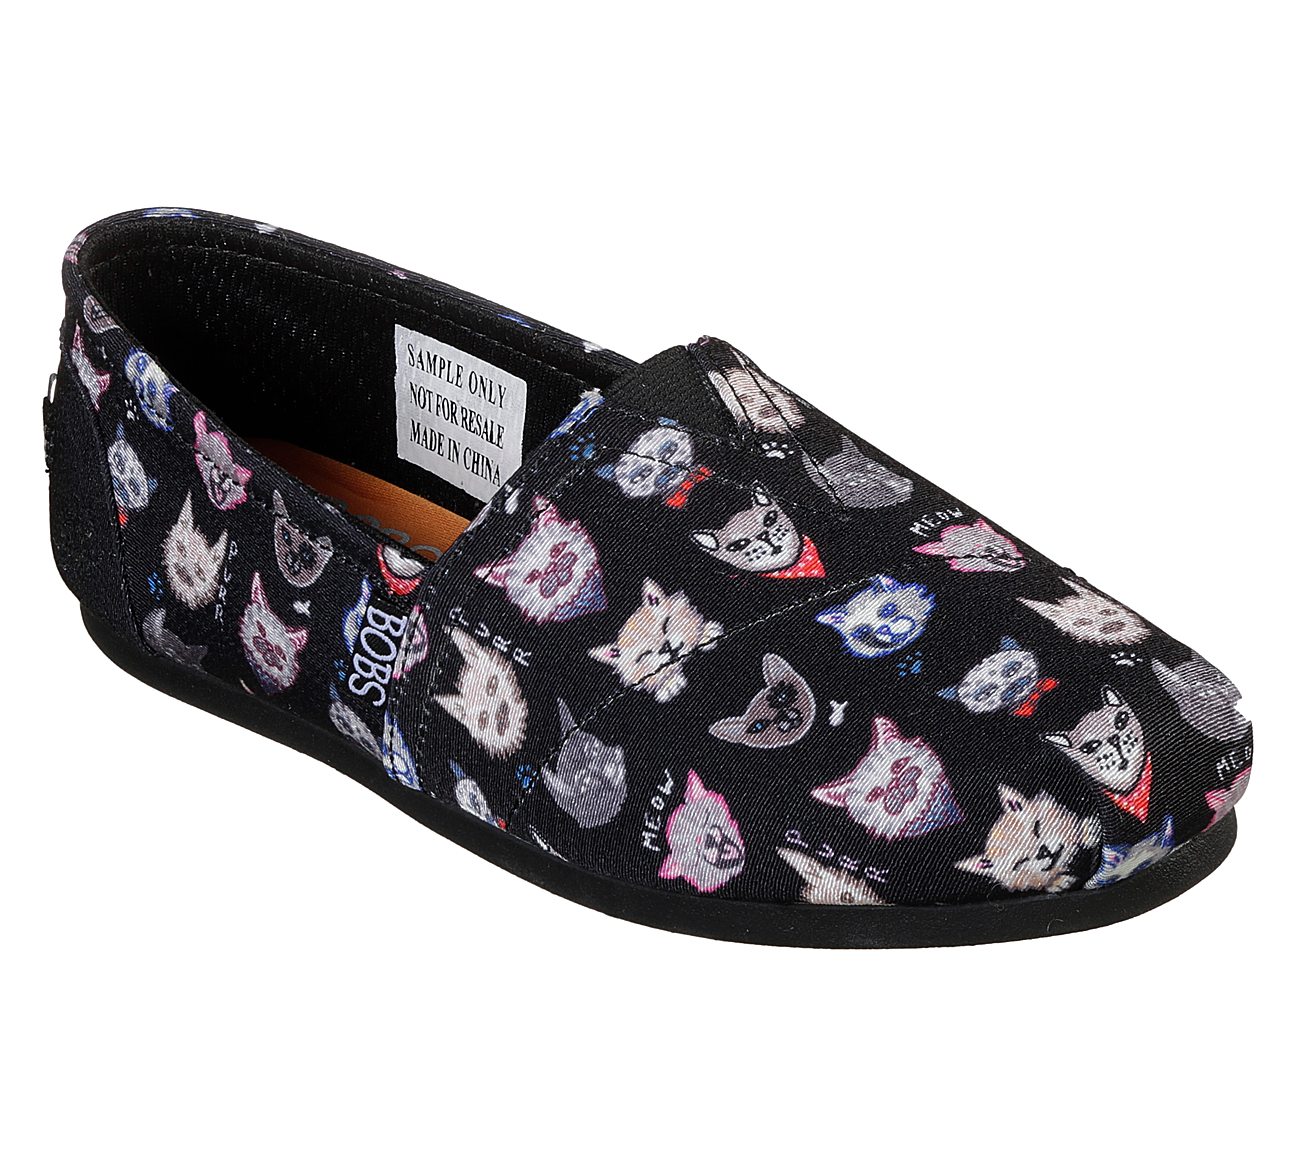 Buy SKECHERS BOBS Plush - Posh Cat BOBS Shoes only $45.00